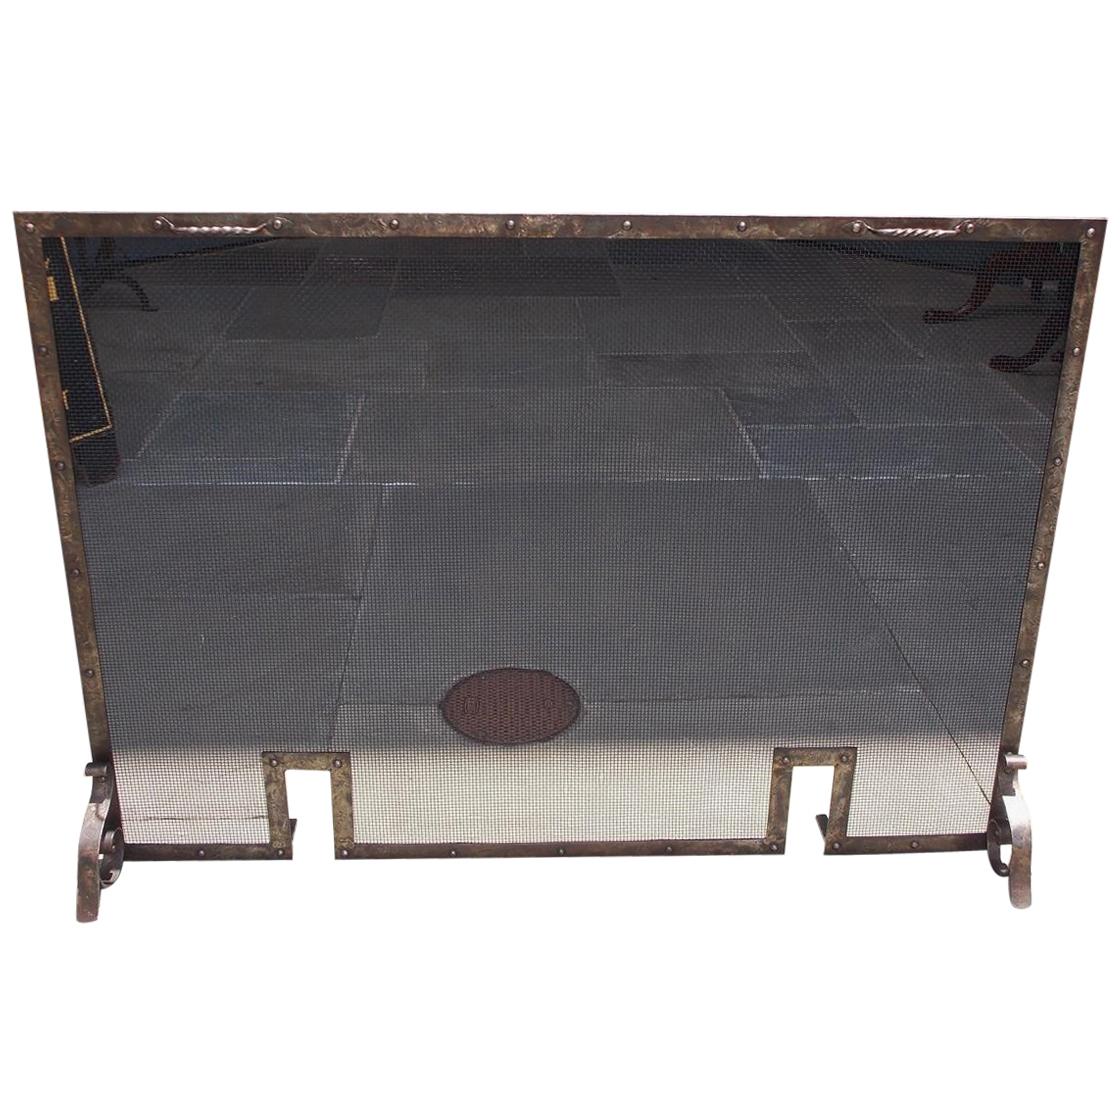 American Cast Iron and Wire Fire Place Screen with Flanking Handles, Circa 1860